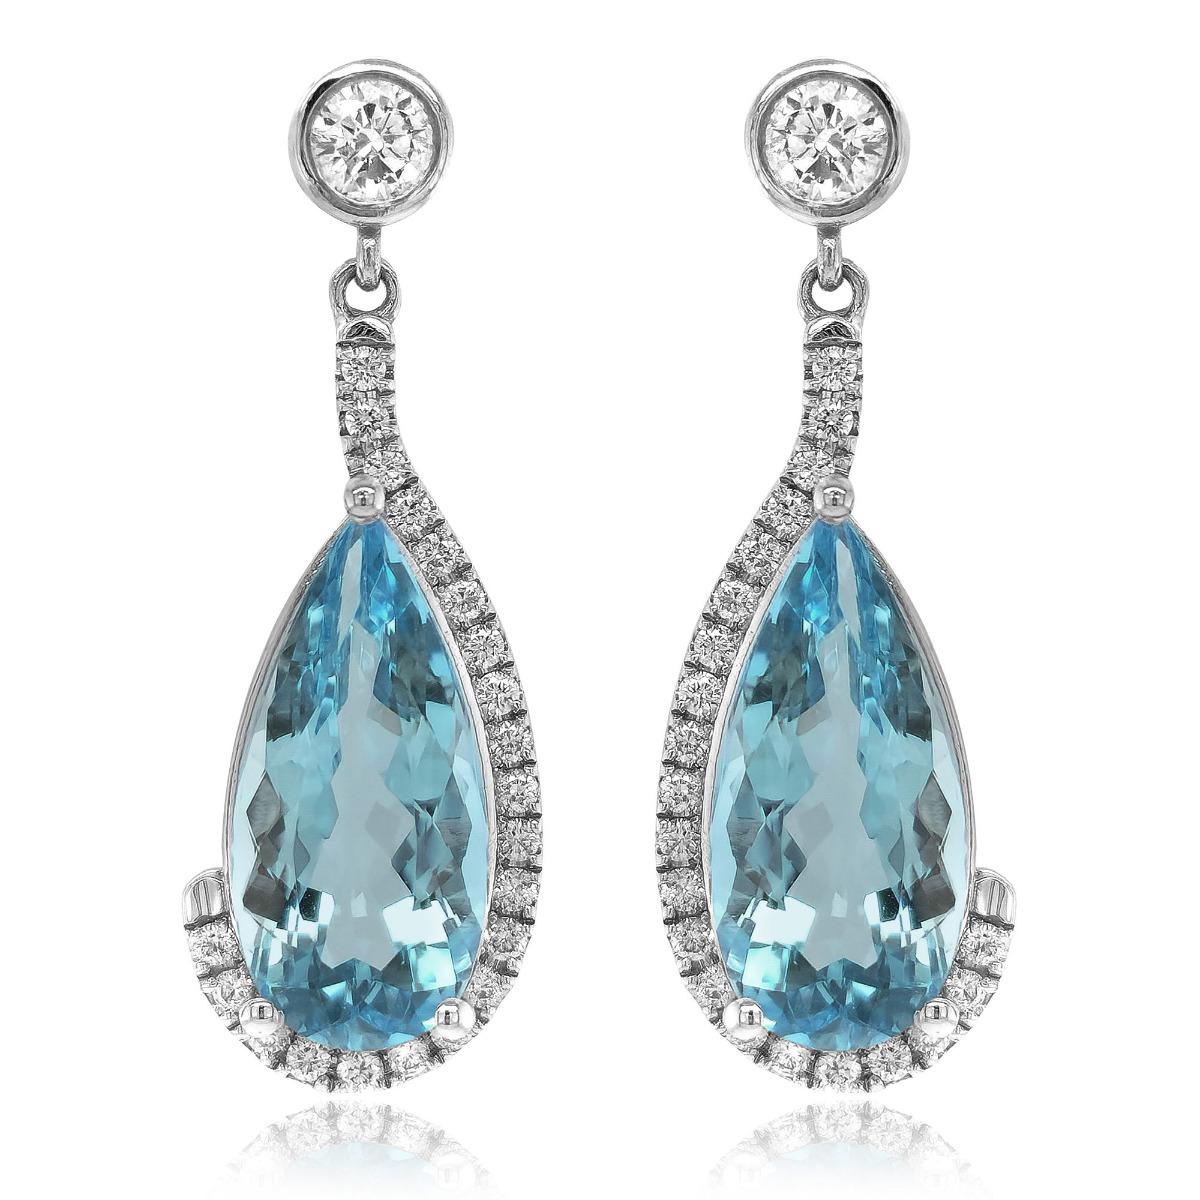 Women's  Natural Aquamarines 5.06 Carat in White Gold Earrings with Diamonds For Sale